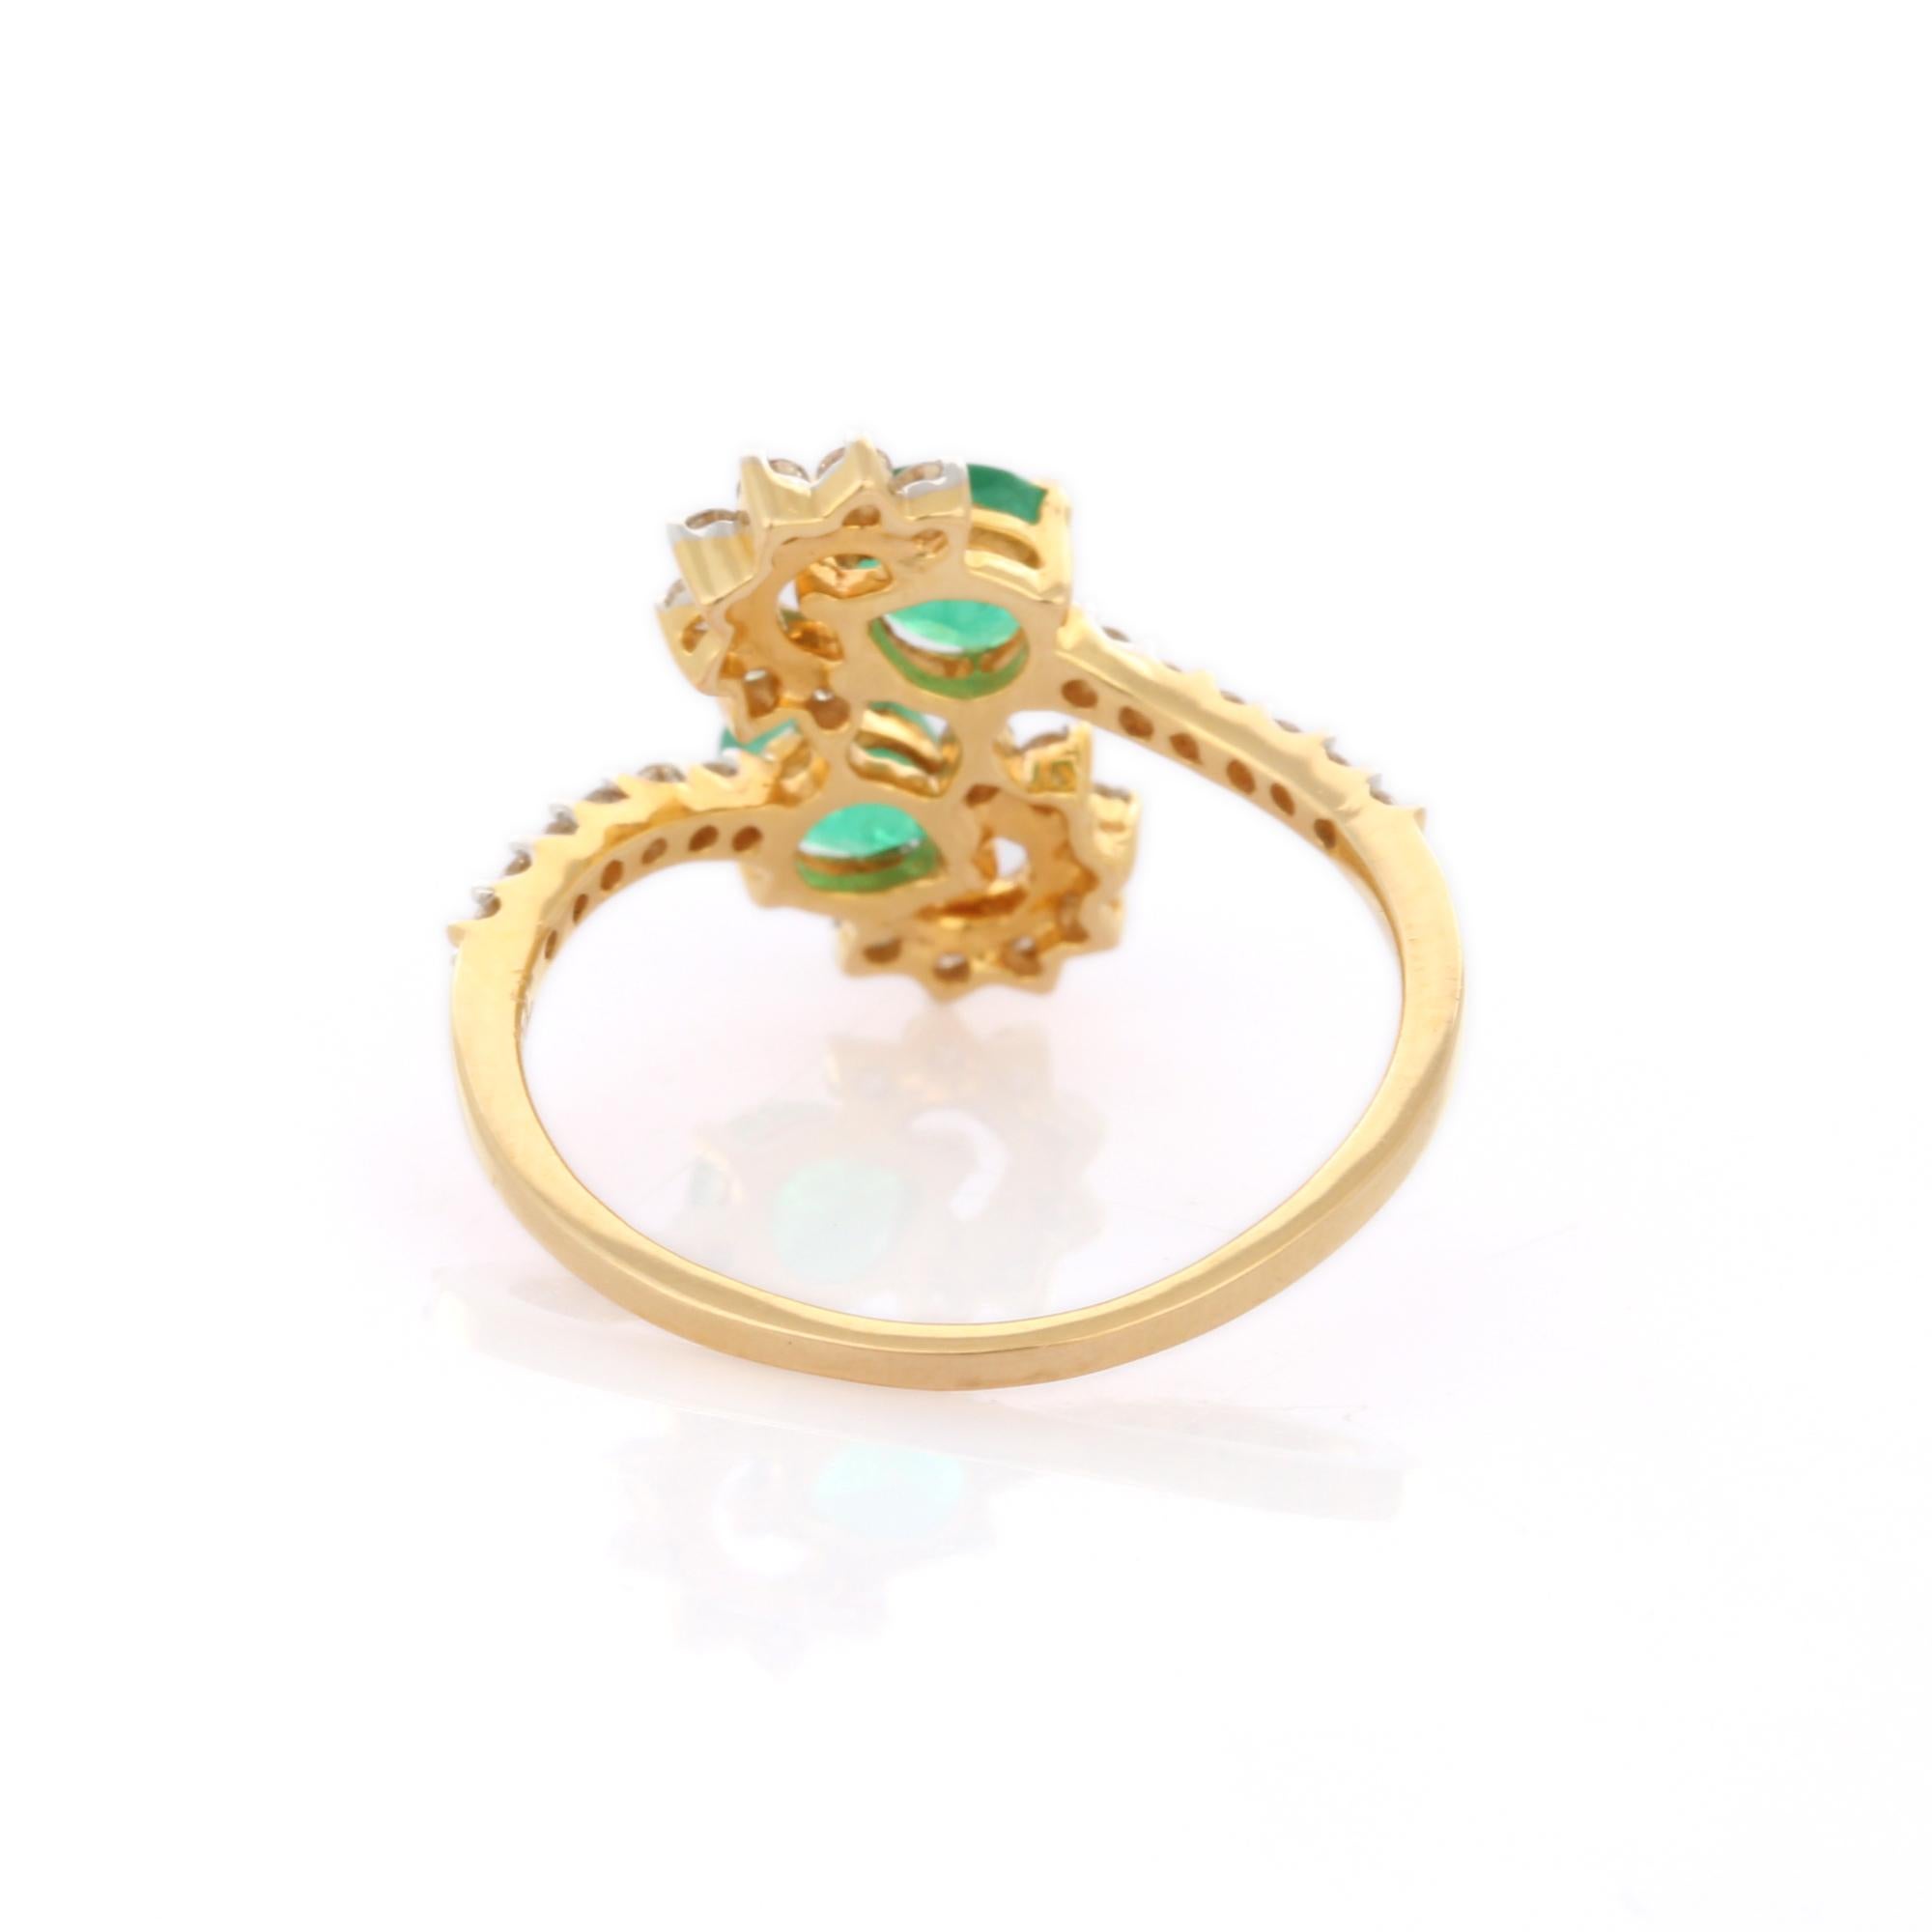 For Sale:  Exquisite Pear Cut Emerald and Diamond Open Ring in 18K Yellow Gold for Her 4